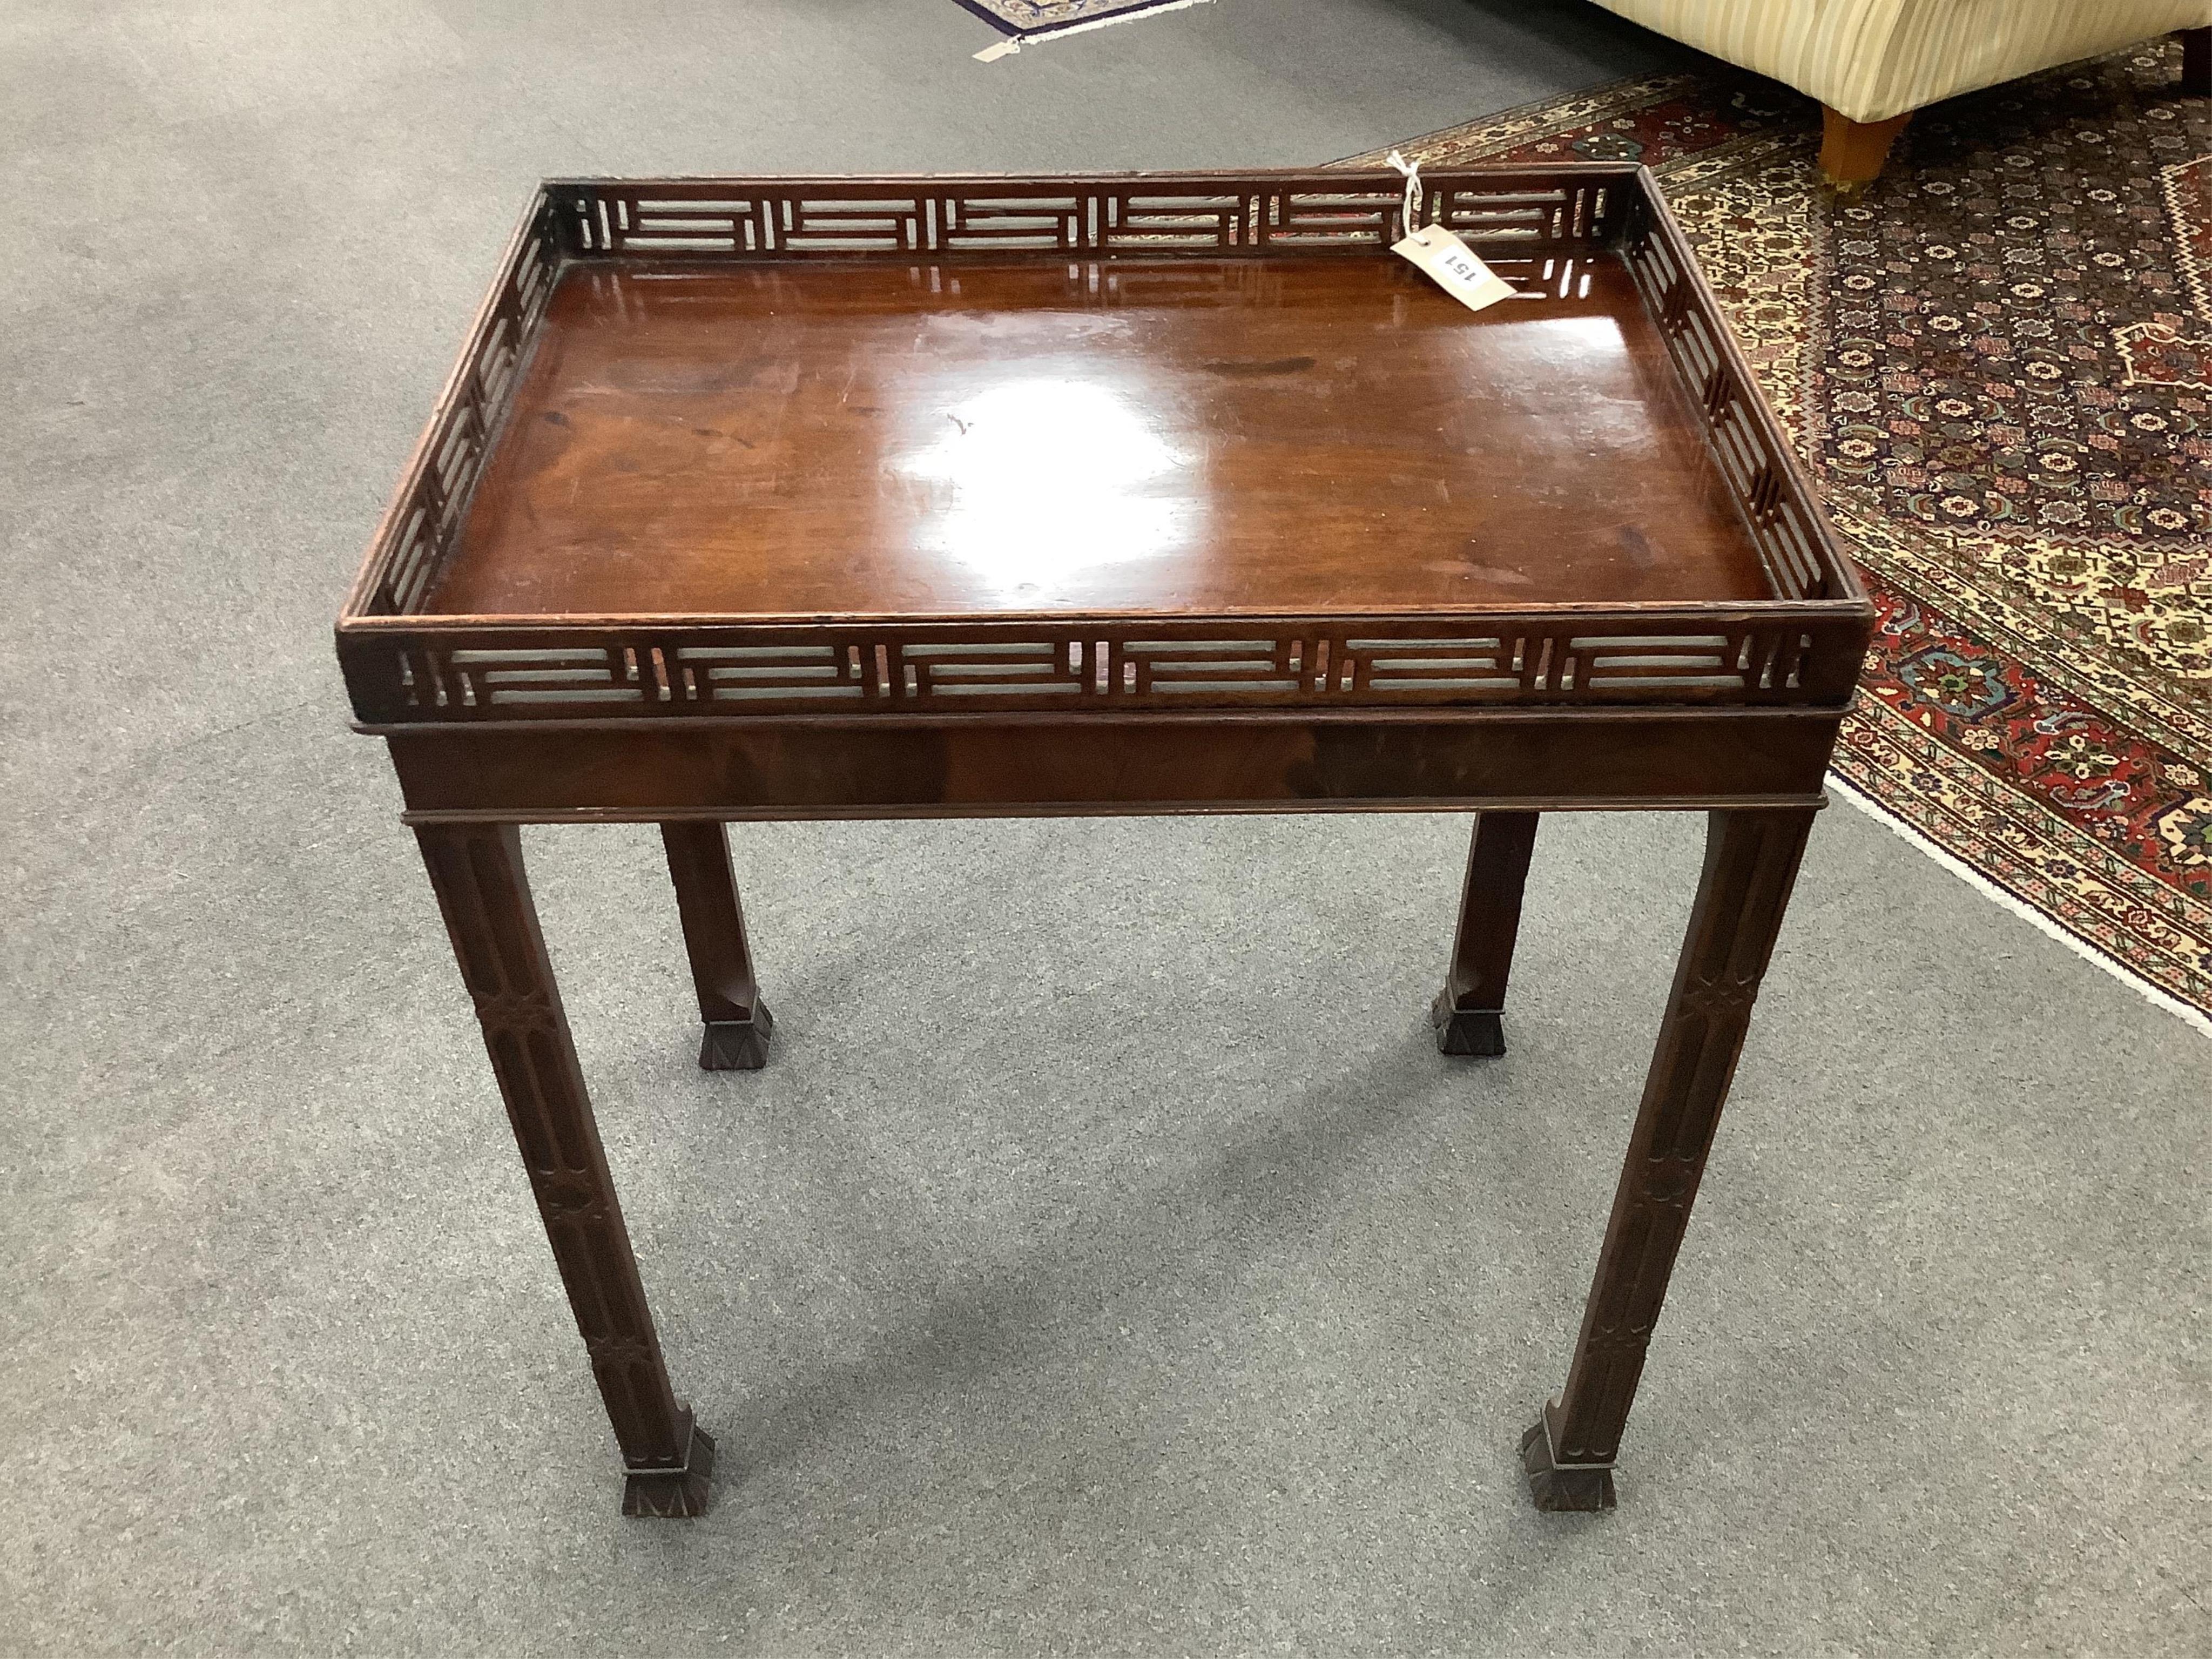 A George III Chippendale period rectangular mahogany silver table with white metal presentation plaque, width 64cm, depth 44cm, height 73cm. (restored). Condition - good